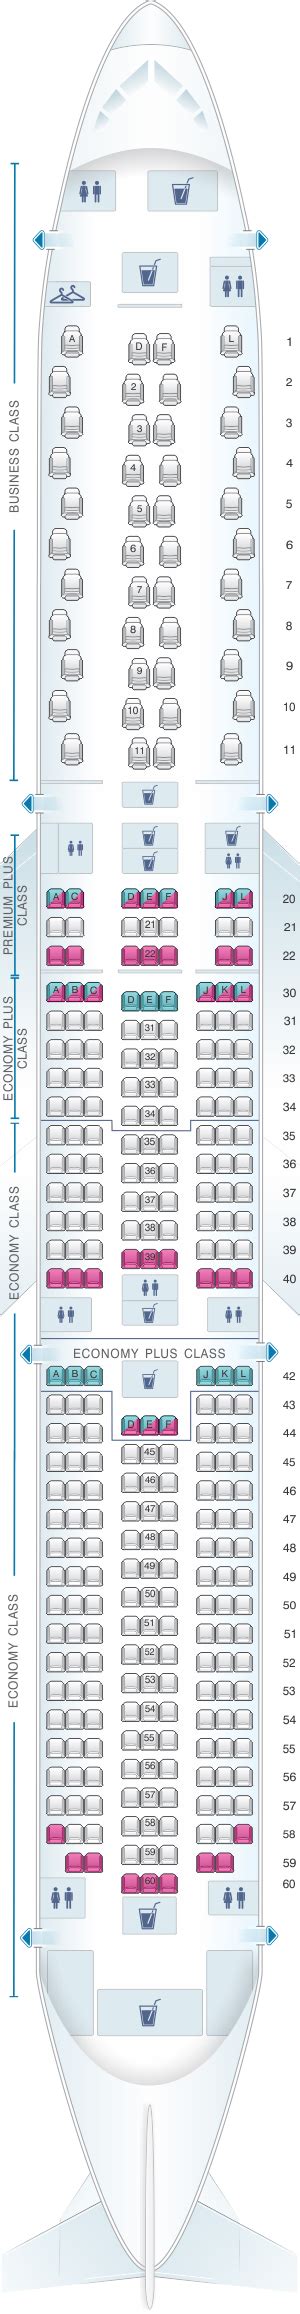 United Airlines 787 10 Seat Map